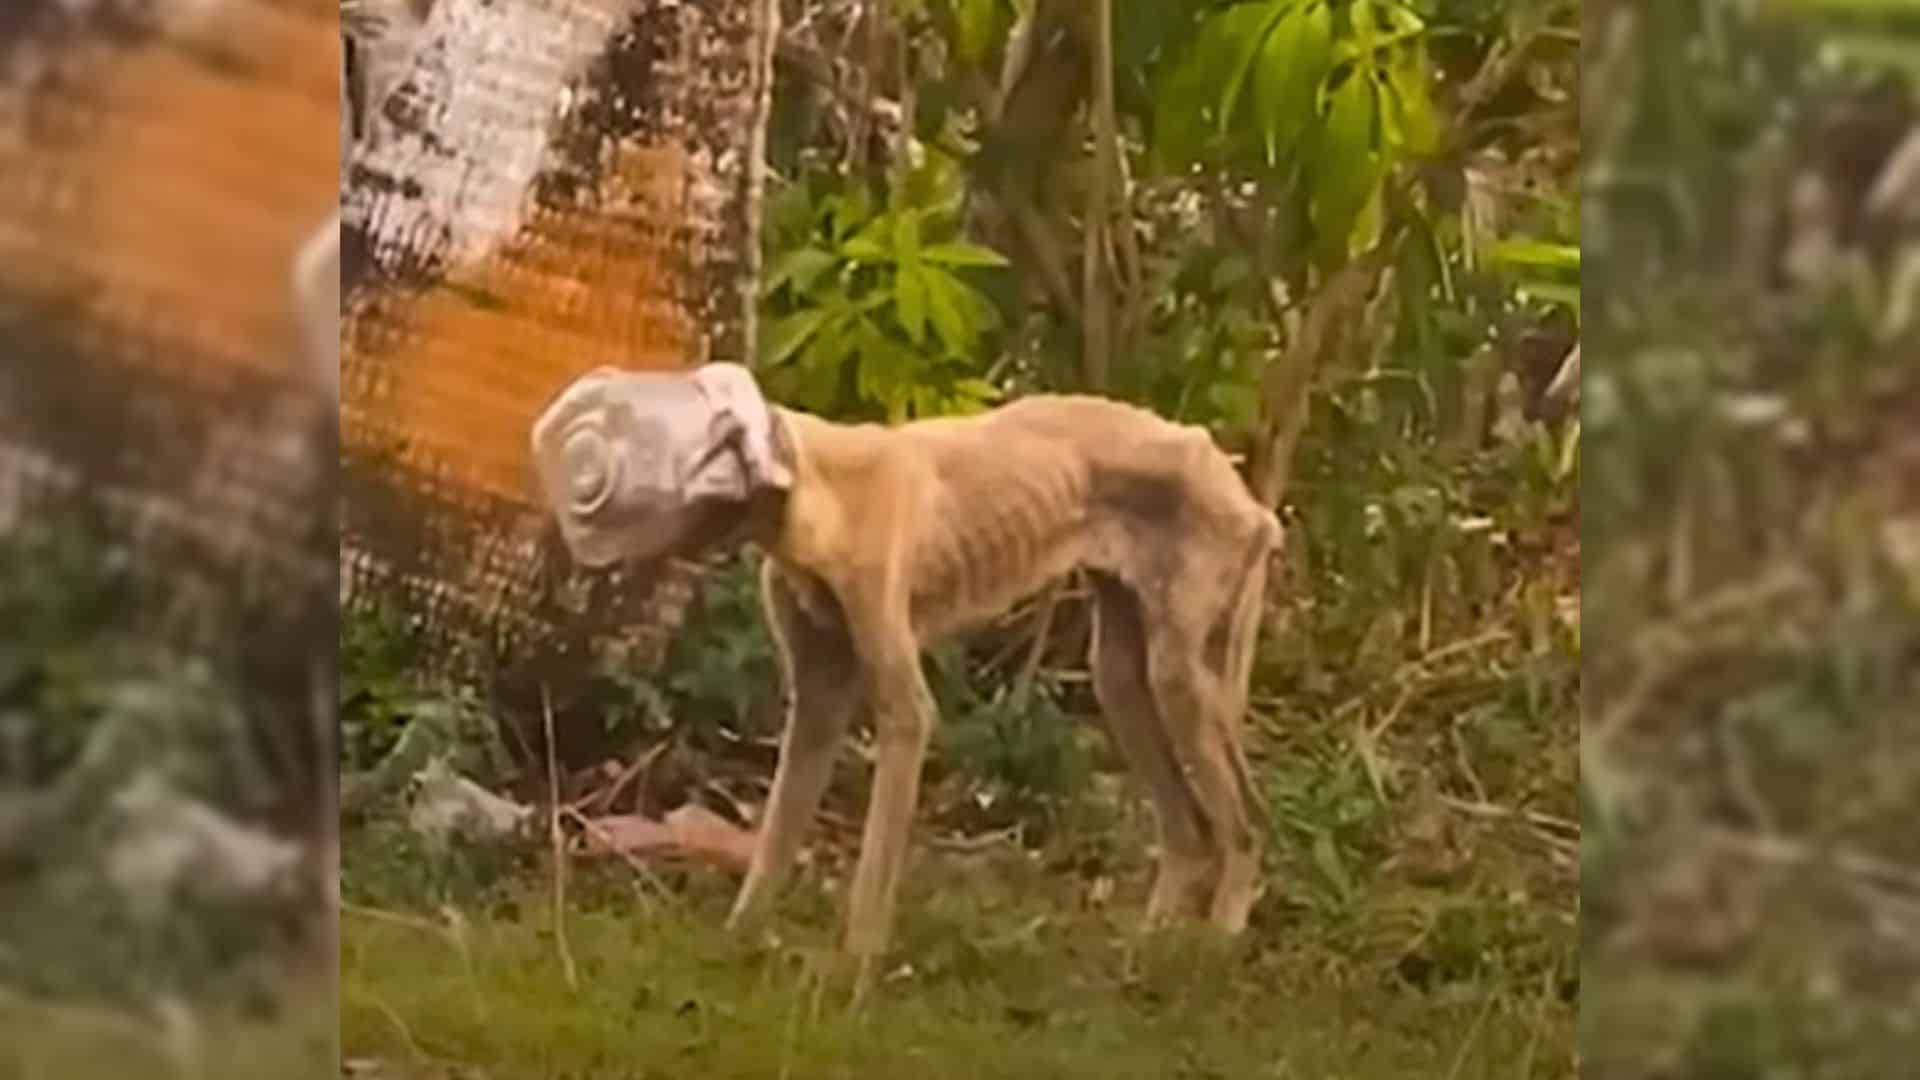 Rescuers Rushed To Aid A Malnourished Dog Whose Head Got Stuck In A Jar